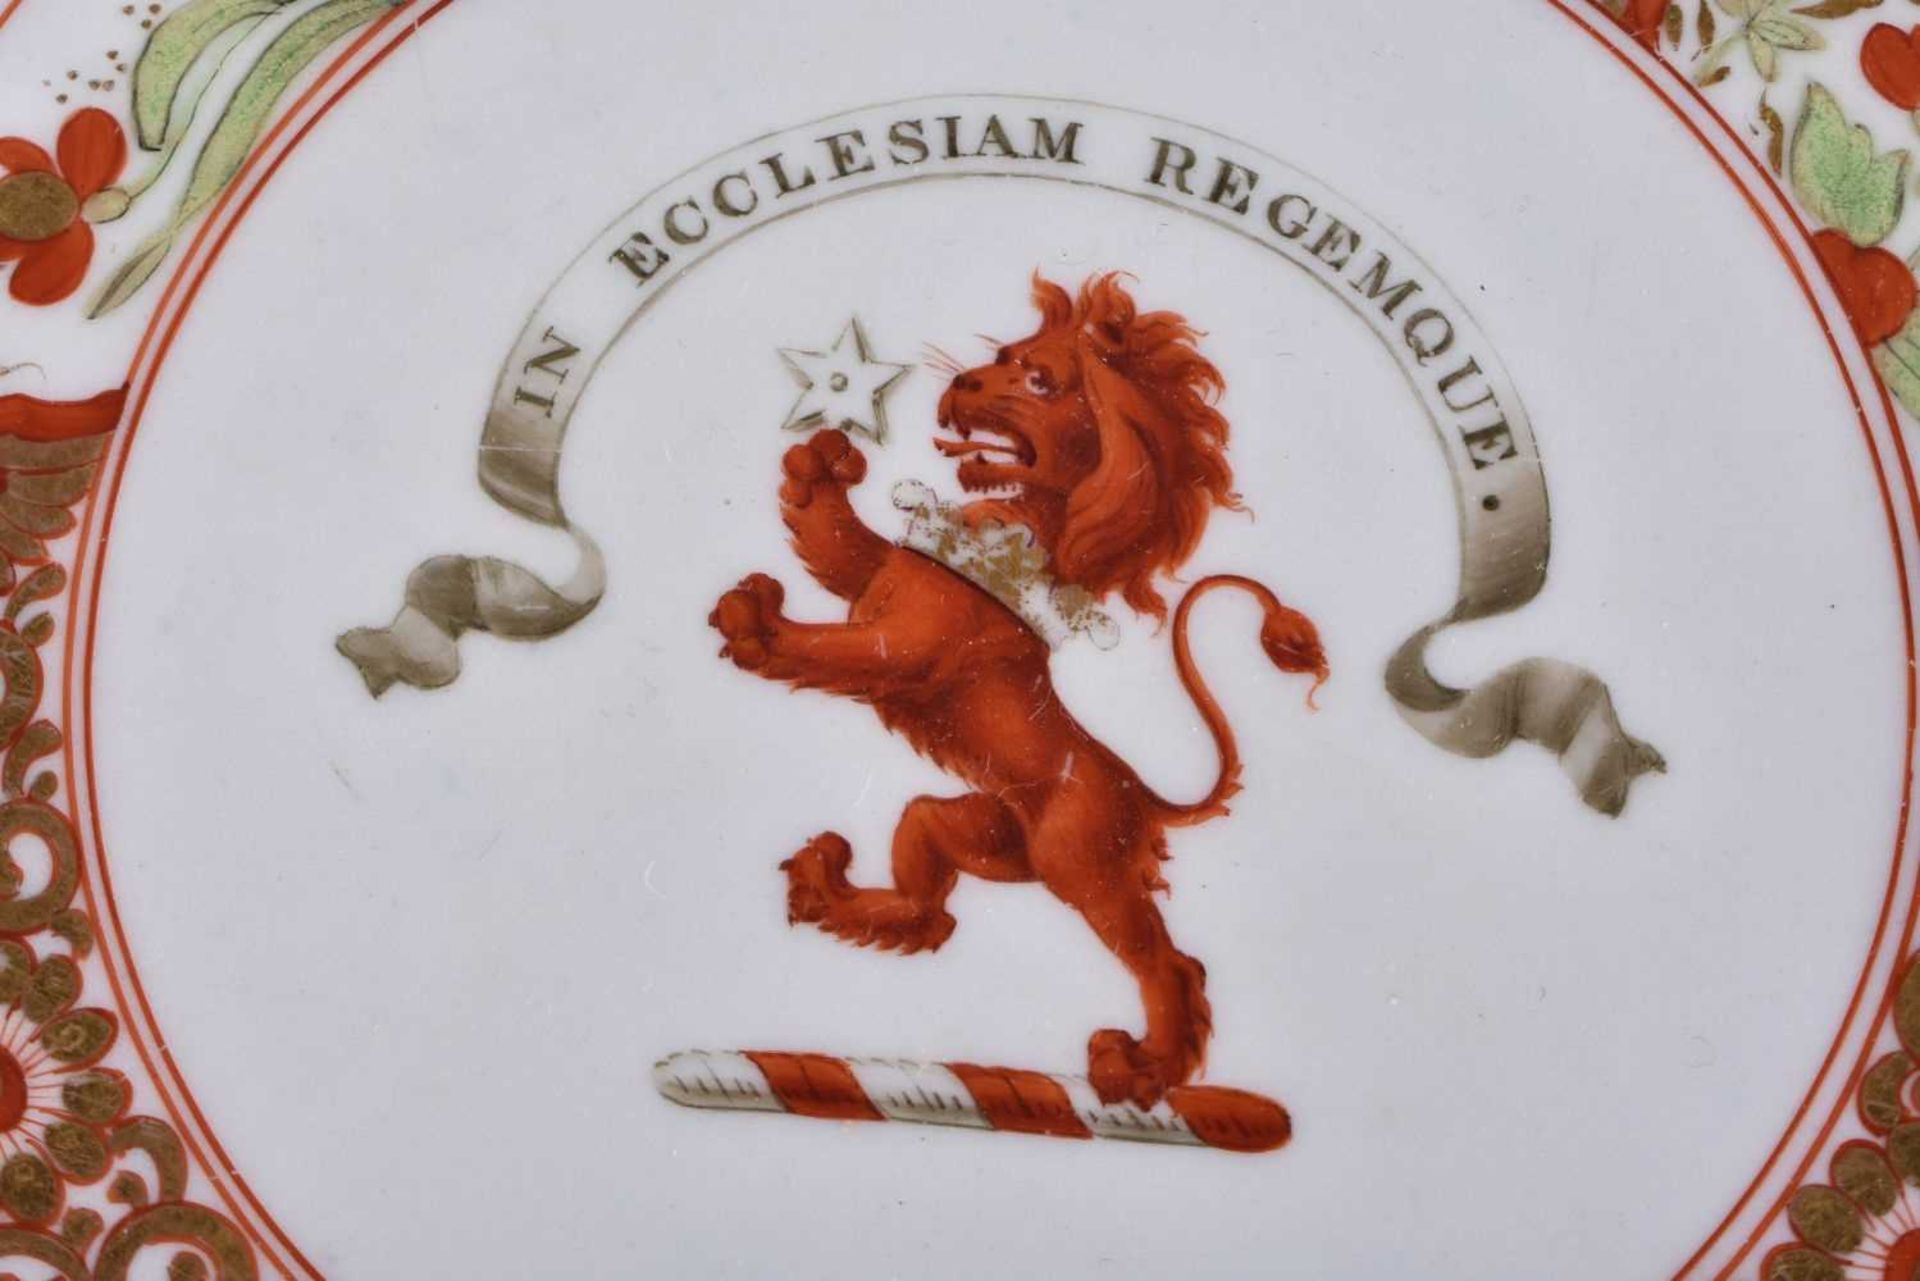 A LATE 18TH/19TH CENTURY FLIGHT BARR AND BARR WORCESTER ARMORIAL PLATE painted with a rearing - Image 2 of 5